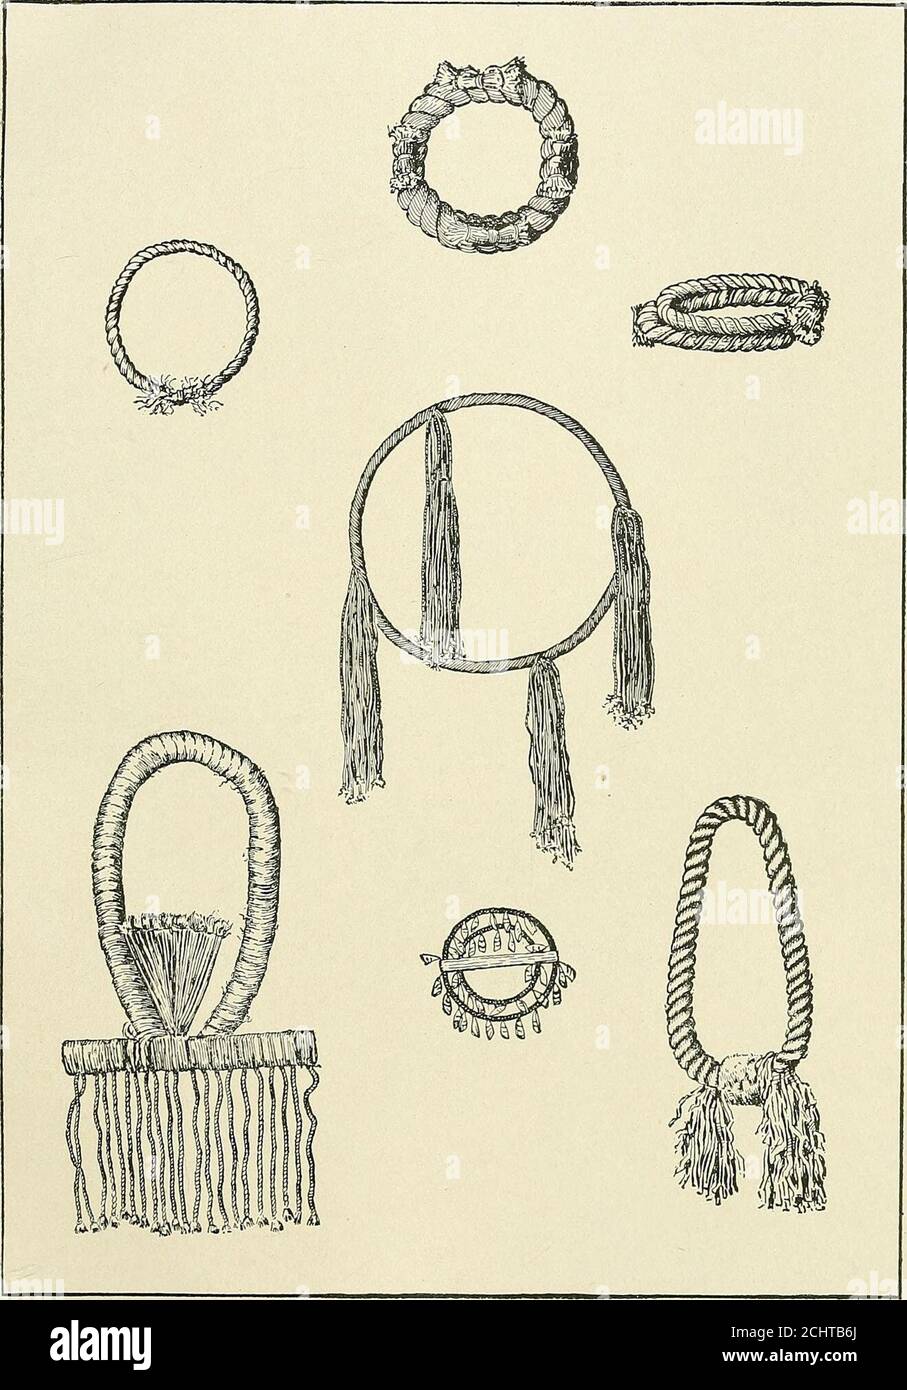 . Annual report of the Board of Regents of the Smithsonian Institution . 0849, 20910, Hoodsinoo Indians,Admiralty Island, Alaska. Collected by James G. Swan. Fig. 70. Necklace. Of cedar-bark rope, like those above, with pendent tassels ofcedar-bark twine. Worn over right shoulder and under right arm.Figs. 67, 68, 69, 70, are Cat. Nos. 129513-15, U. S. N. M. Talcomk, sub-tribe of Bilqula Indians. Vancouver Island, British Columbia. Col-lected by Dr. Franz Boas. Fig, 71, Girdle or Necklace, Of cedar-bark rope. Worn around the neck with the pendant down the back of the wearer in the south previou Stock Photo